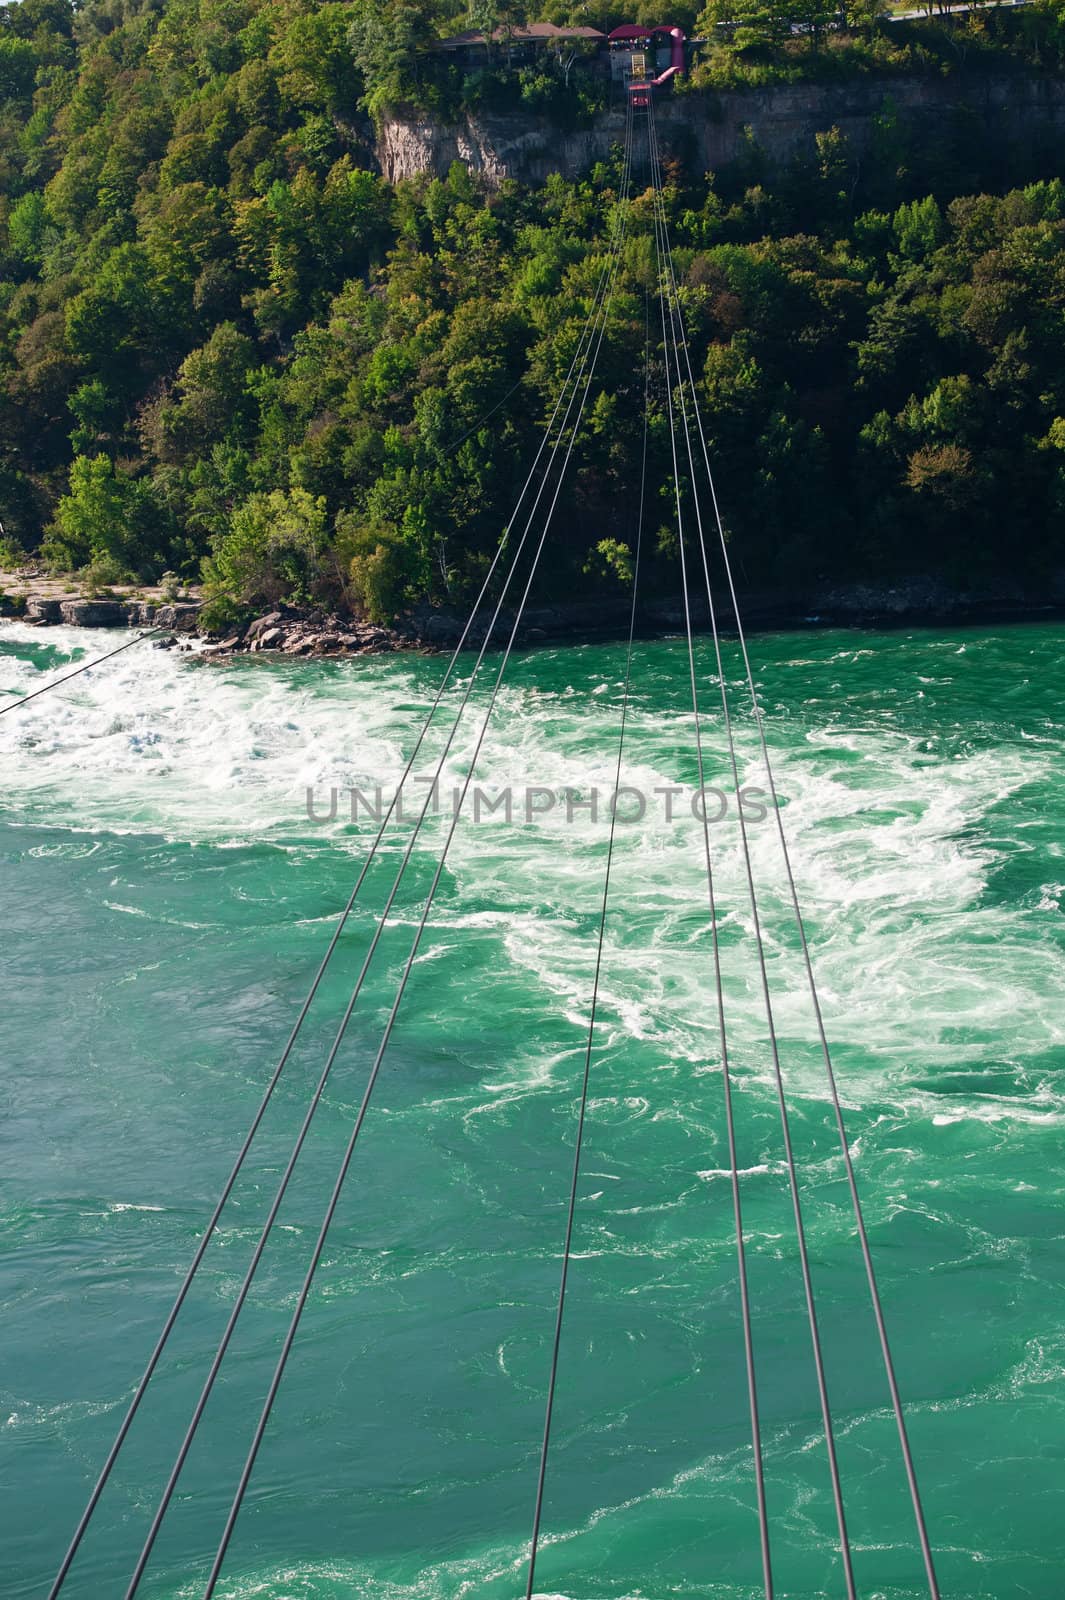 A cable car suspended over the Niagara River downstream from Niagara Falls.